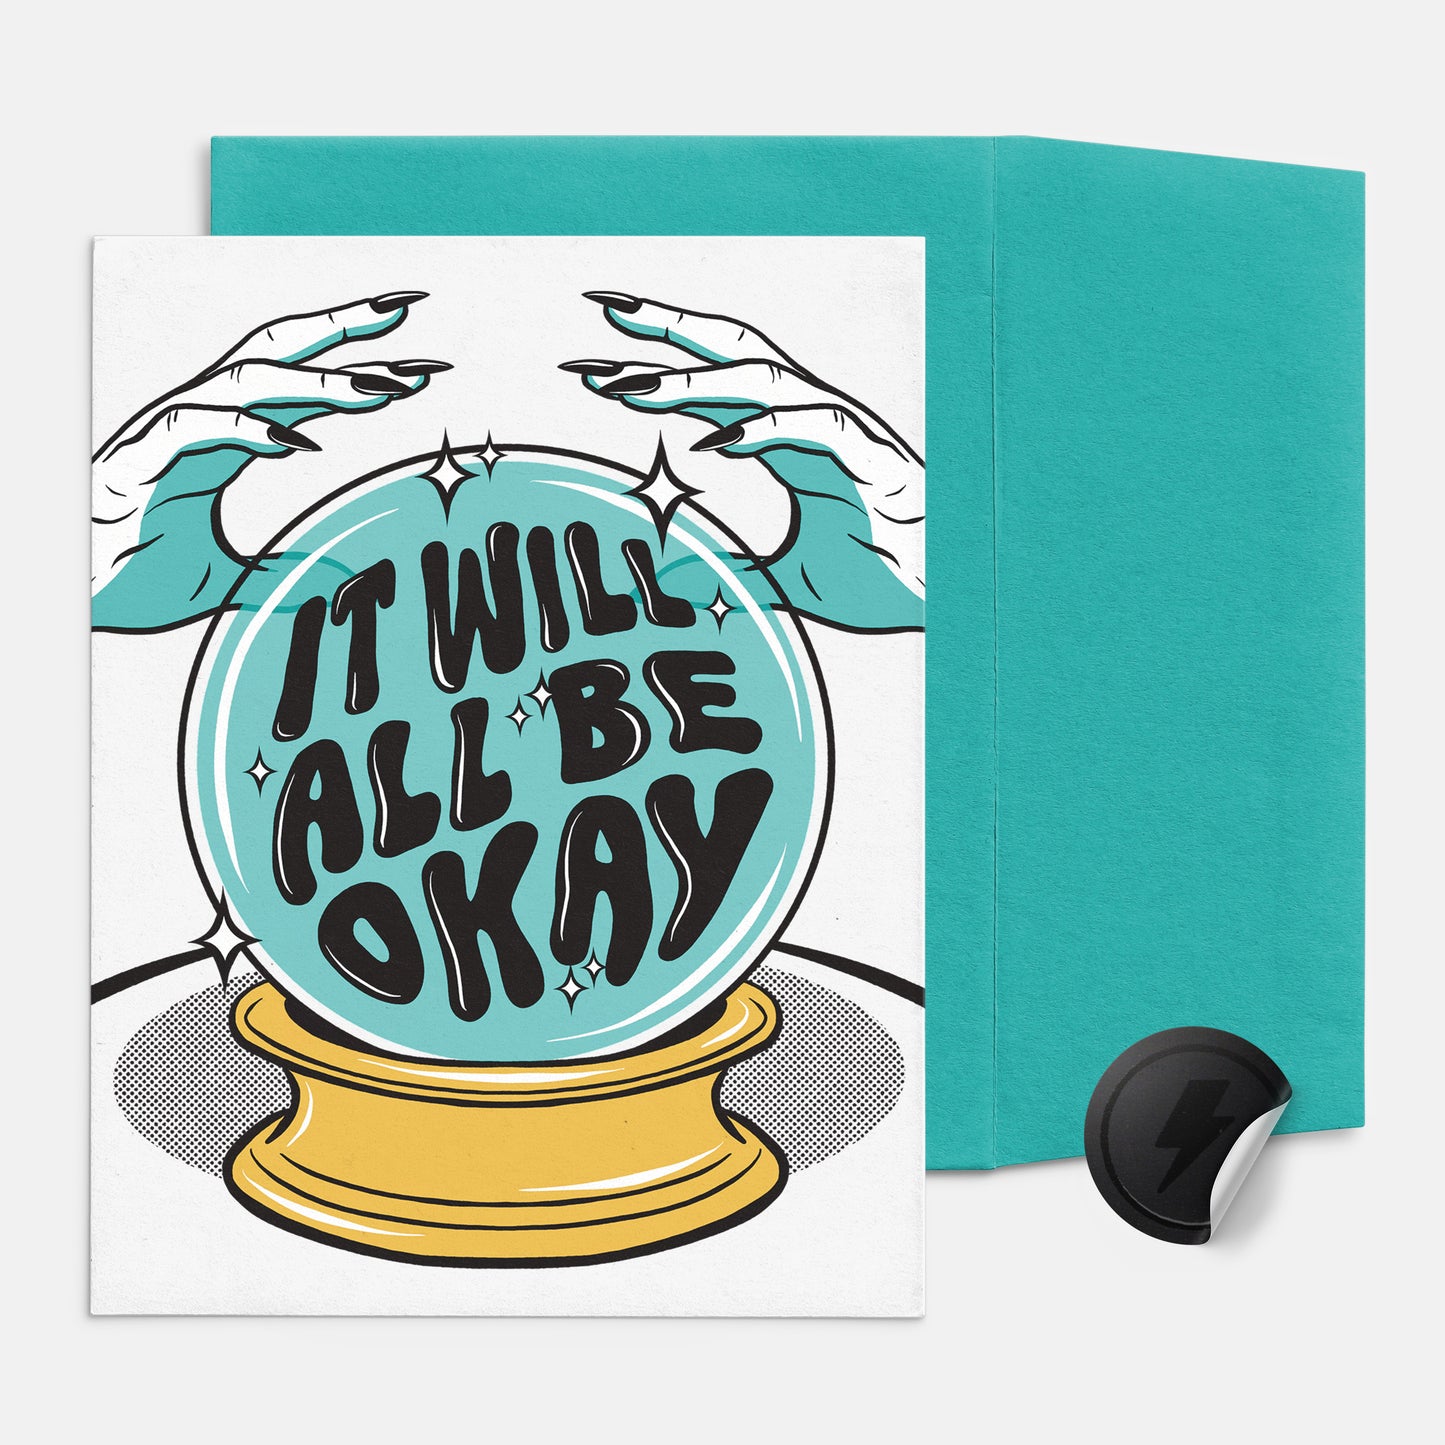 All will be OK card